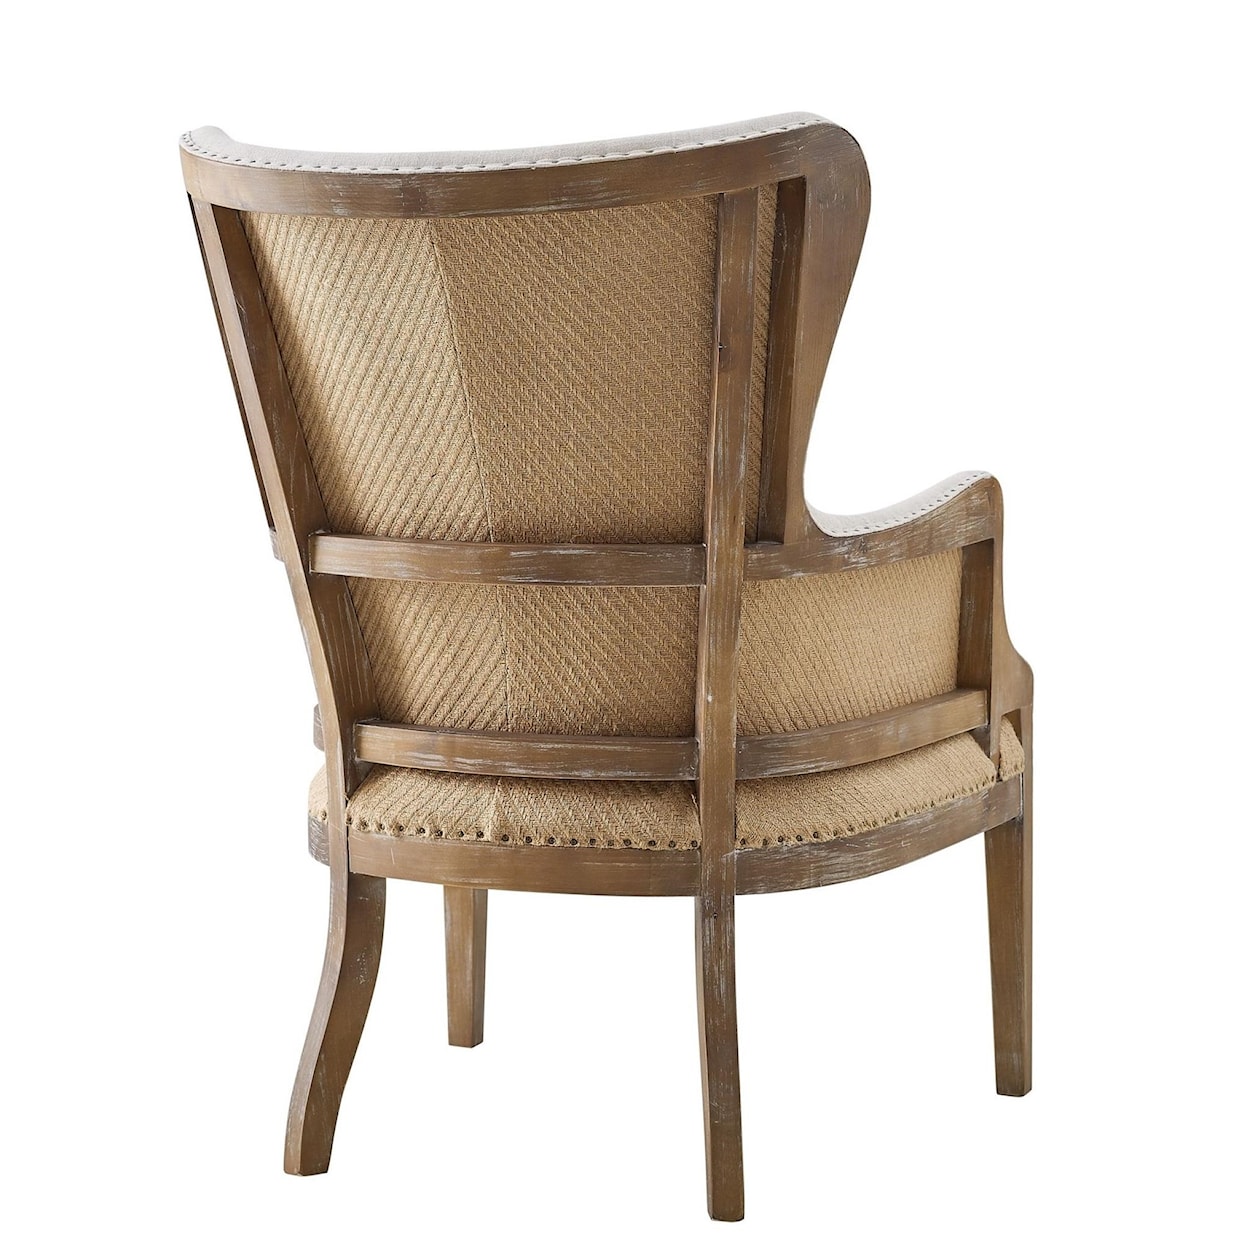 Prime George Wingback Accent Chair